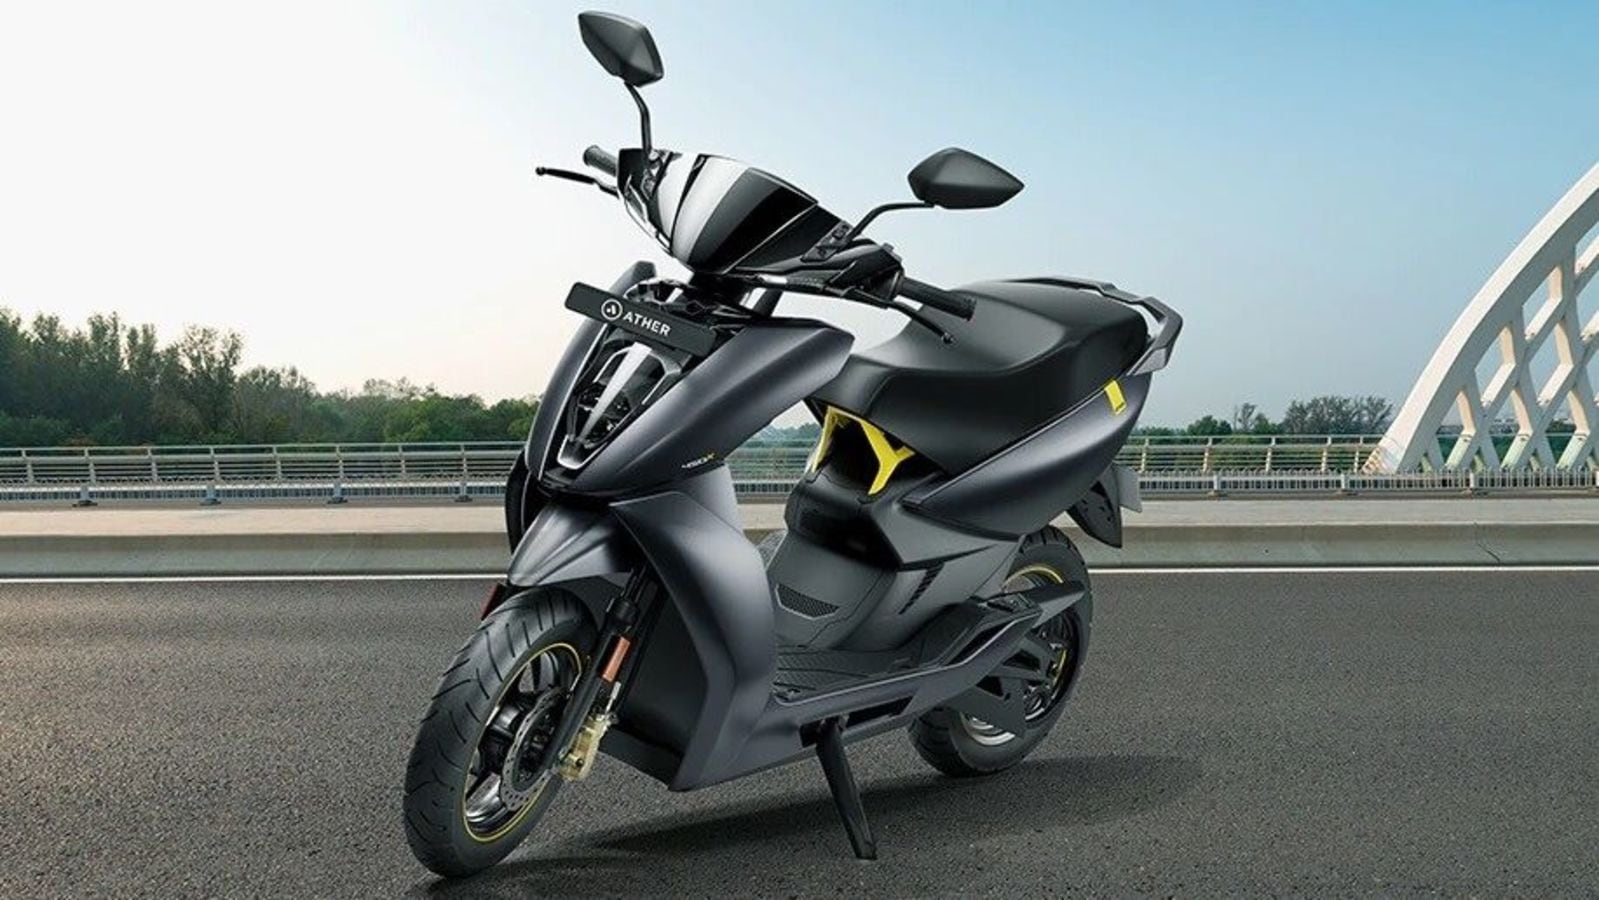 5,000+ electric twowheelers sell weekly in India, govt gives credit to